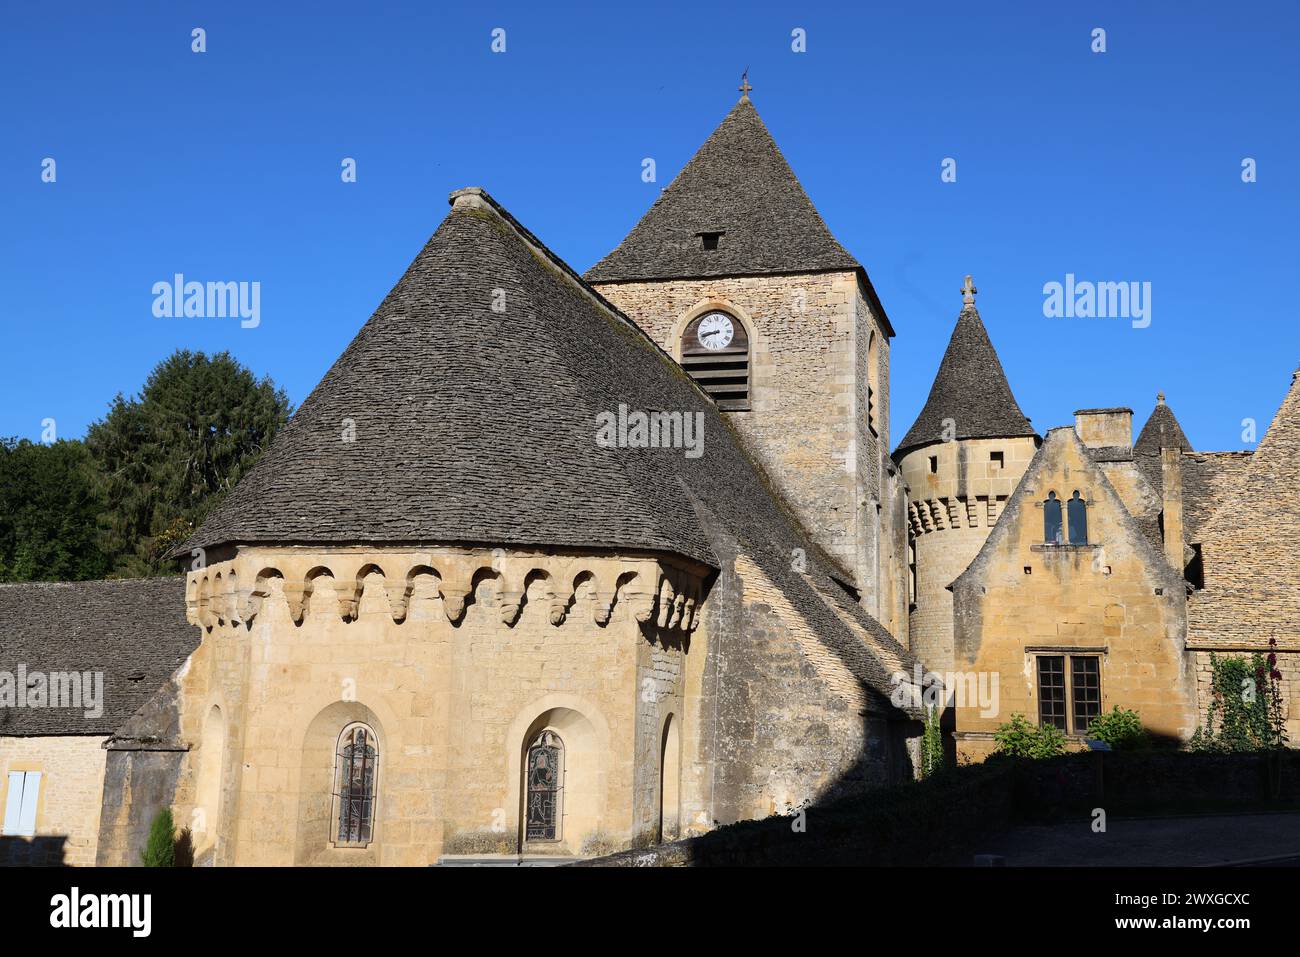 Saint-Geniès is one of the most beautiful villages in Périgord Noir, halfway between Sarlat and Montignac-Lascaux. Its charm lies in its ocher stone h Stock Photo